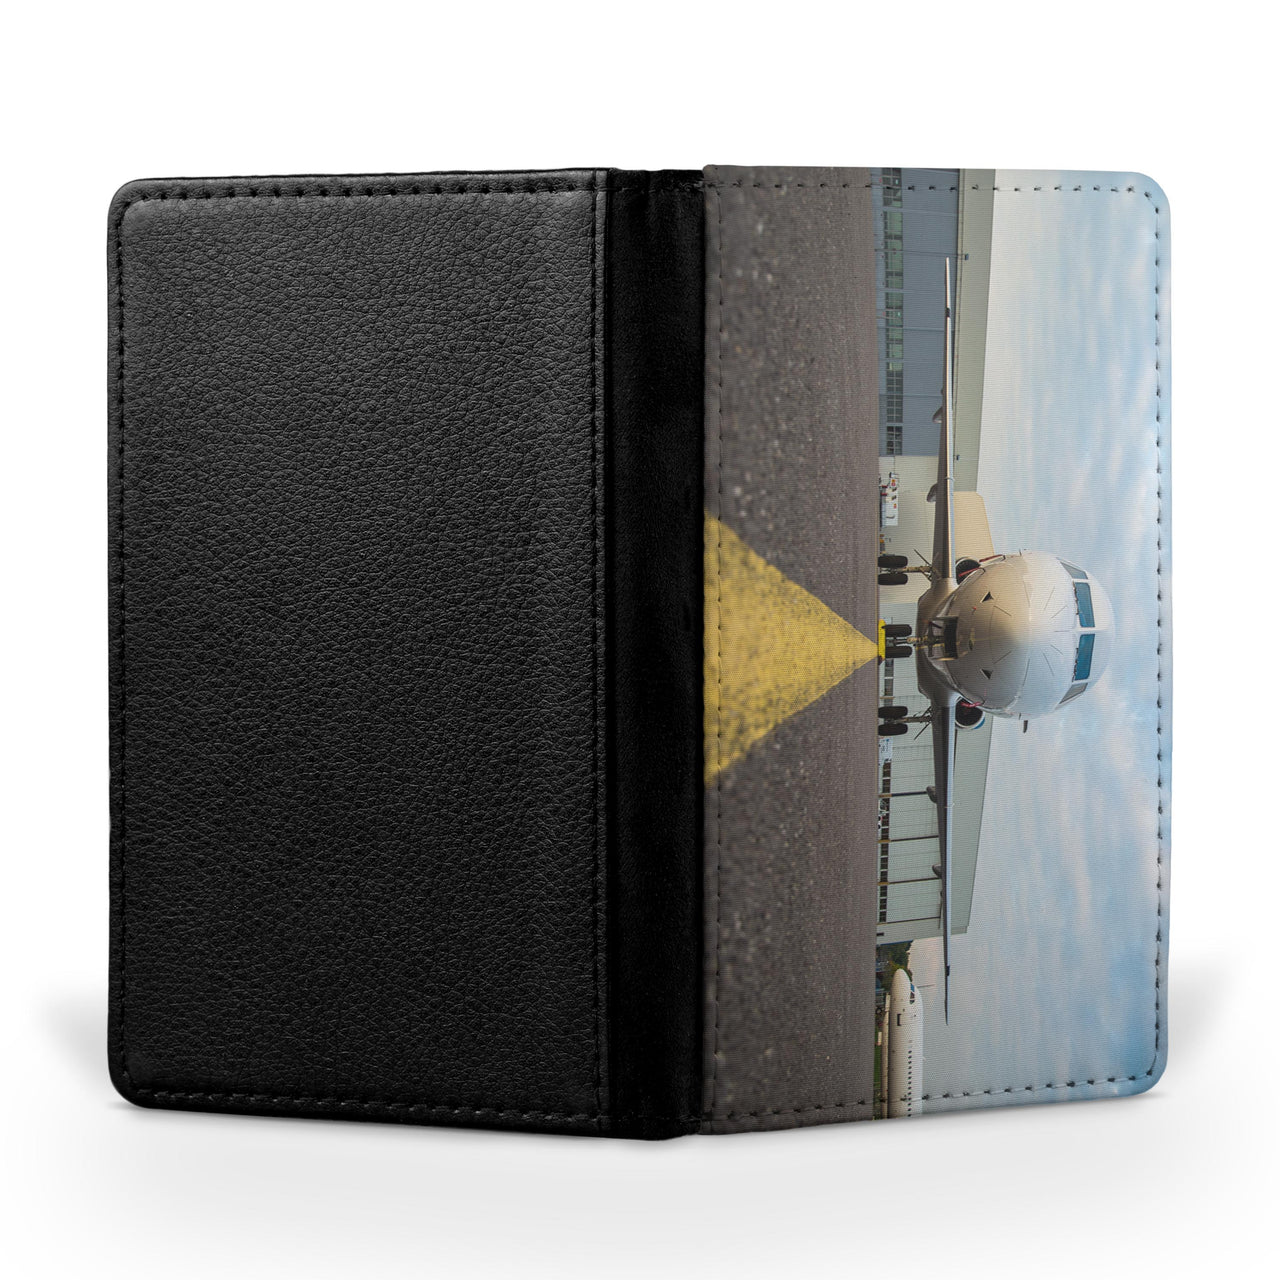 Face to Face with Beautiful Jet Printed Passport & Travel Cases